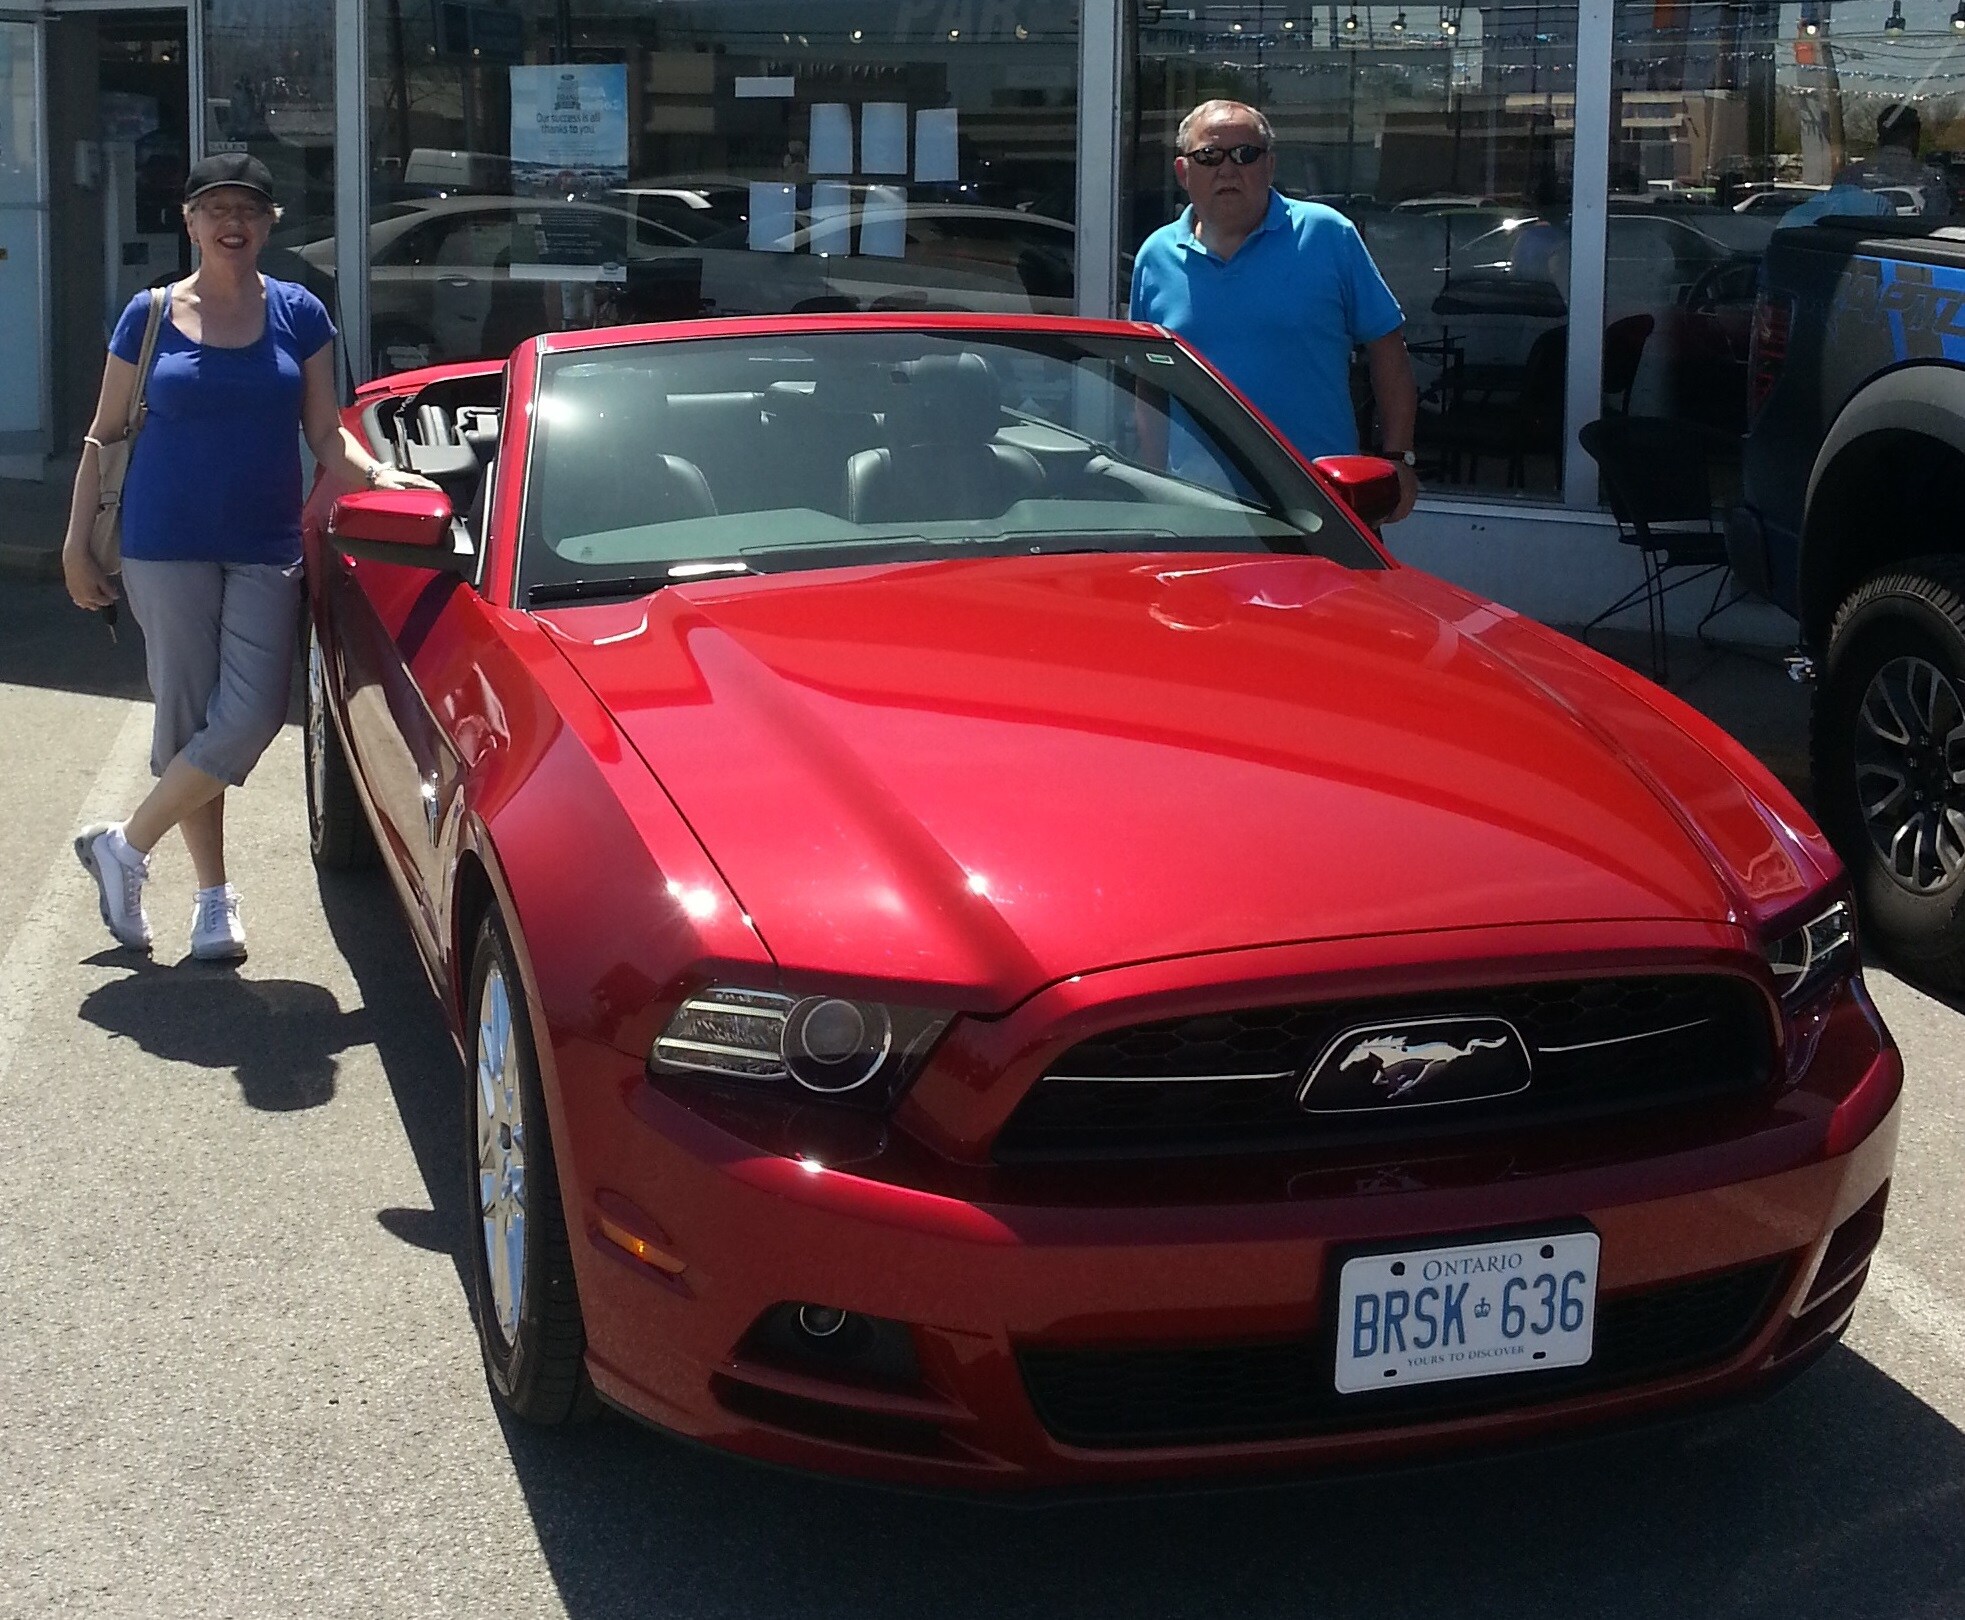 Ed learn ford st catharines ontario #10